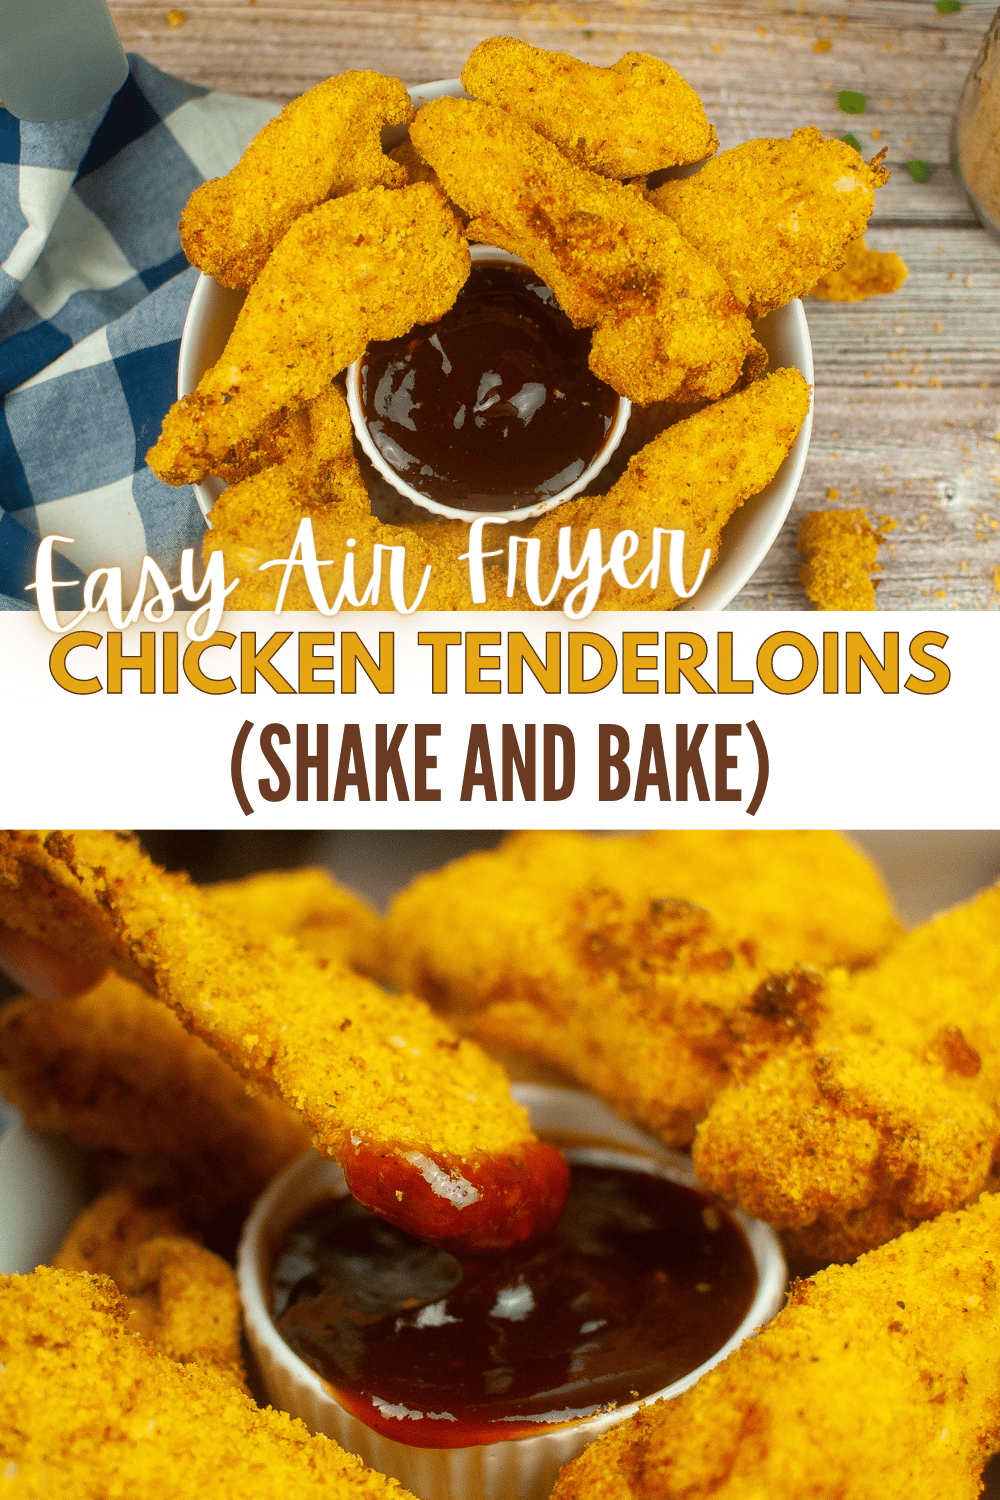 These Air Fryer Chicken Tenderloins are crispy on the outside and juicy on the inside making them a family favorite! #airfryerchickentenderloins #airfryer #chickentenderloins #shakeandbake #chicken via @wondermomwannab